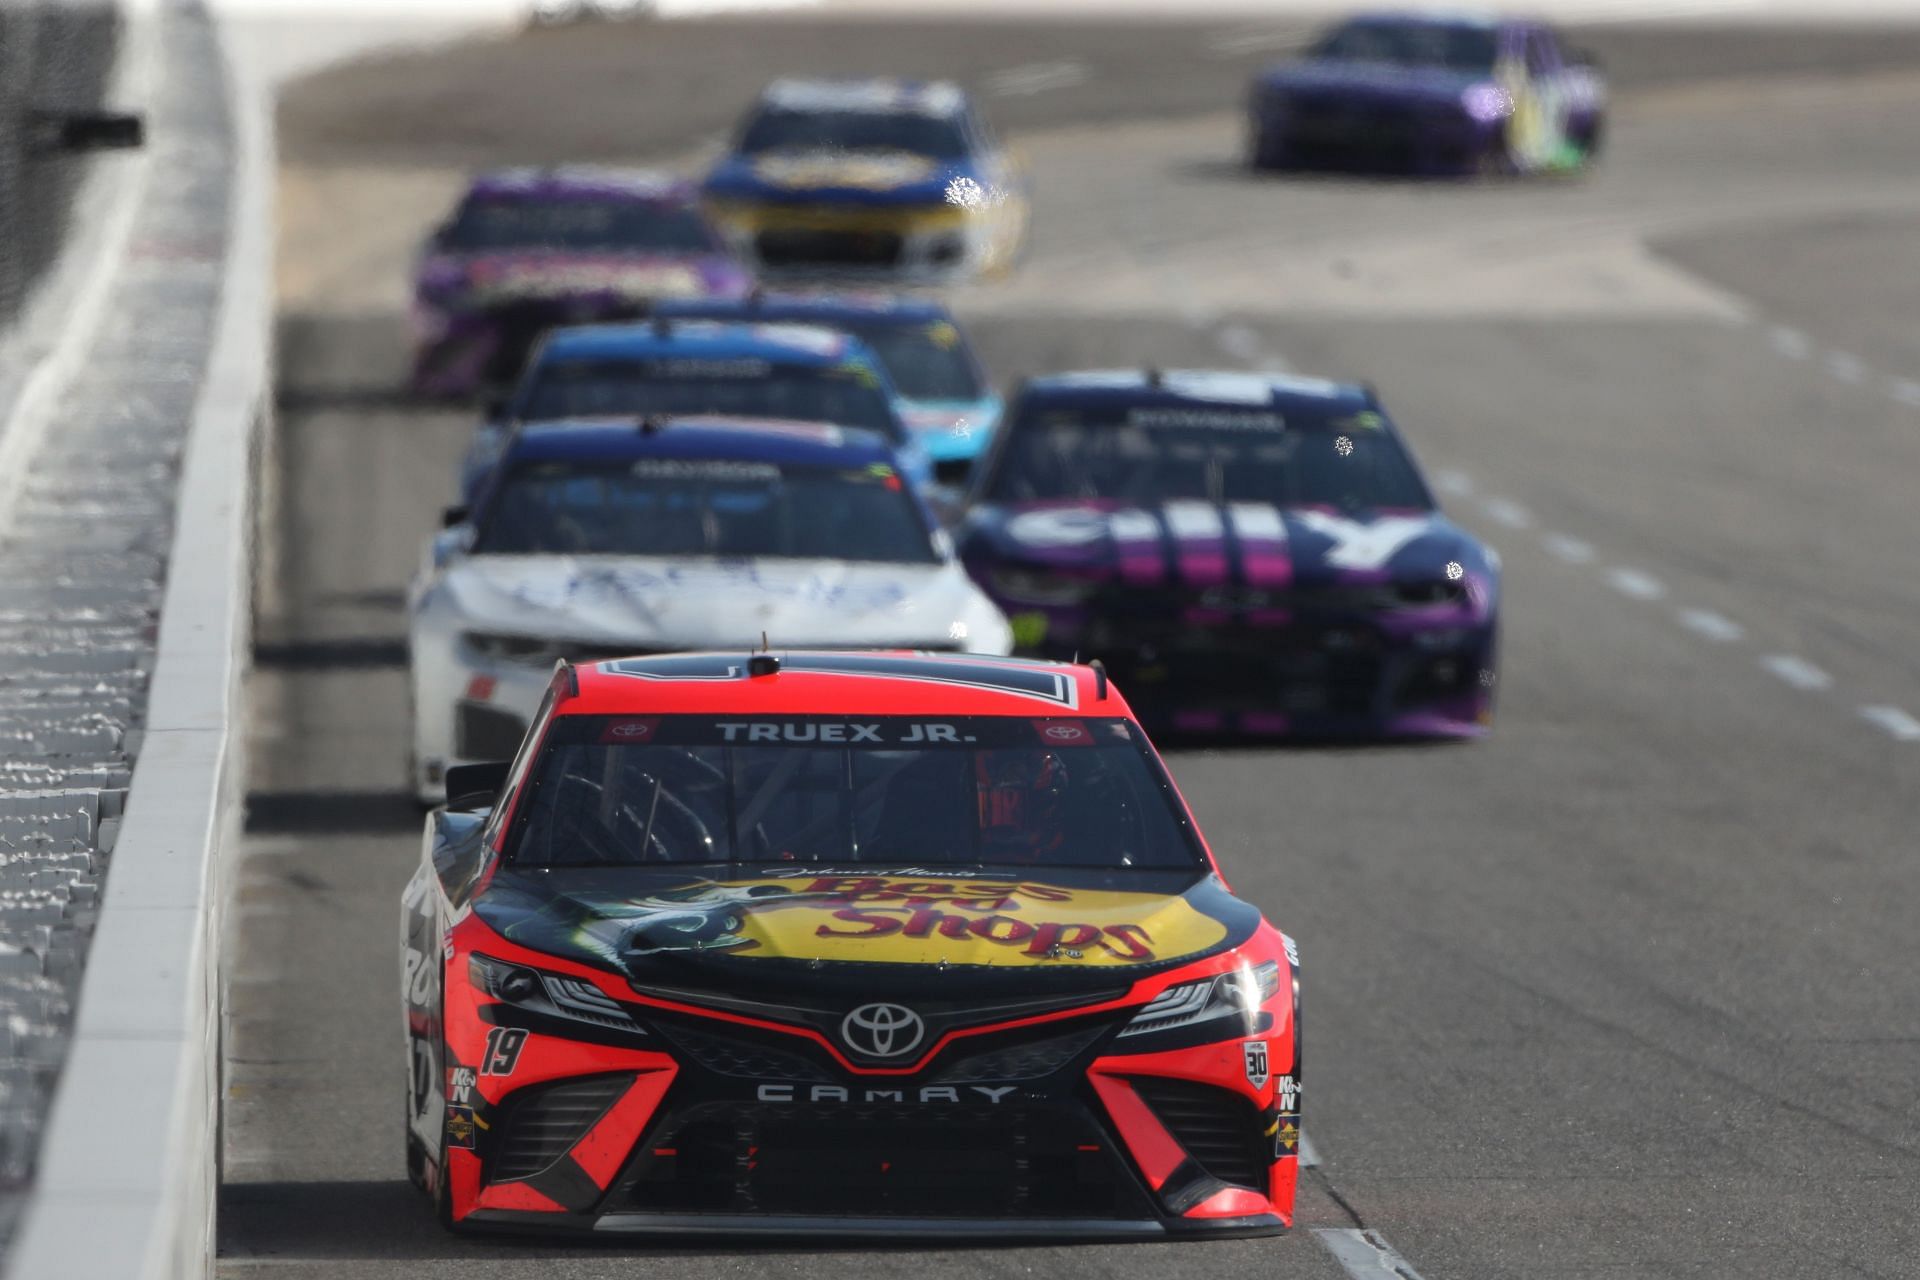 Martin Truex Jr. leads the field during the NASCAR Cup Series Blue-Emu Maximum Pain Relief 500 at Martinsville Speedway (Photo by James Gilbert/Getty Images)